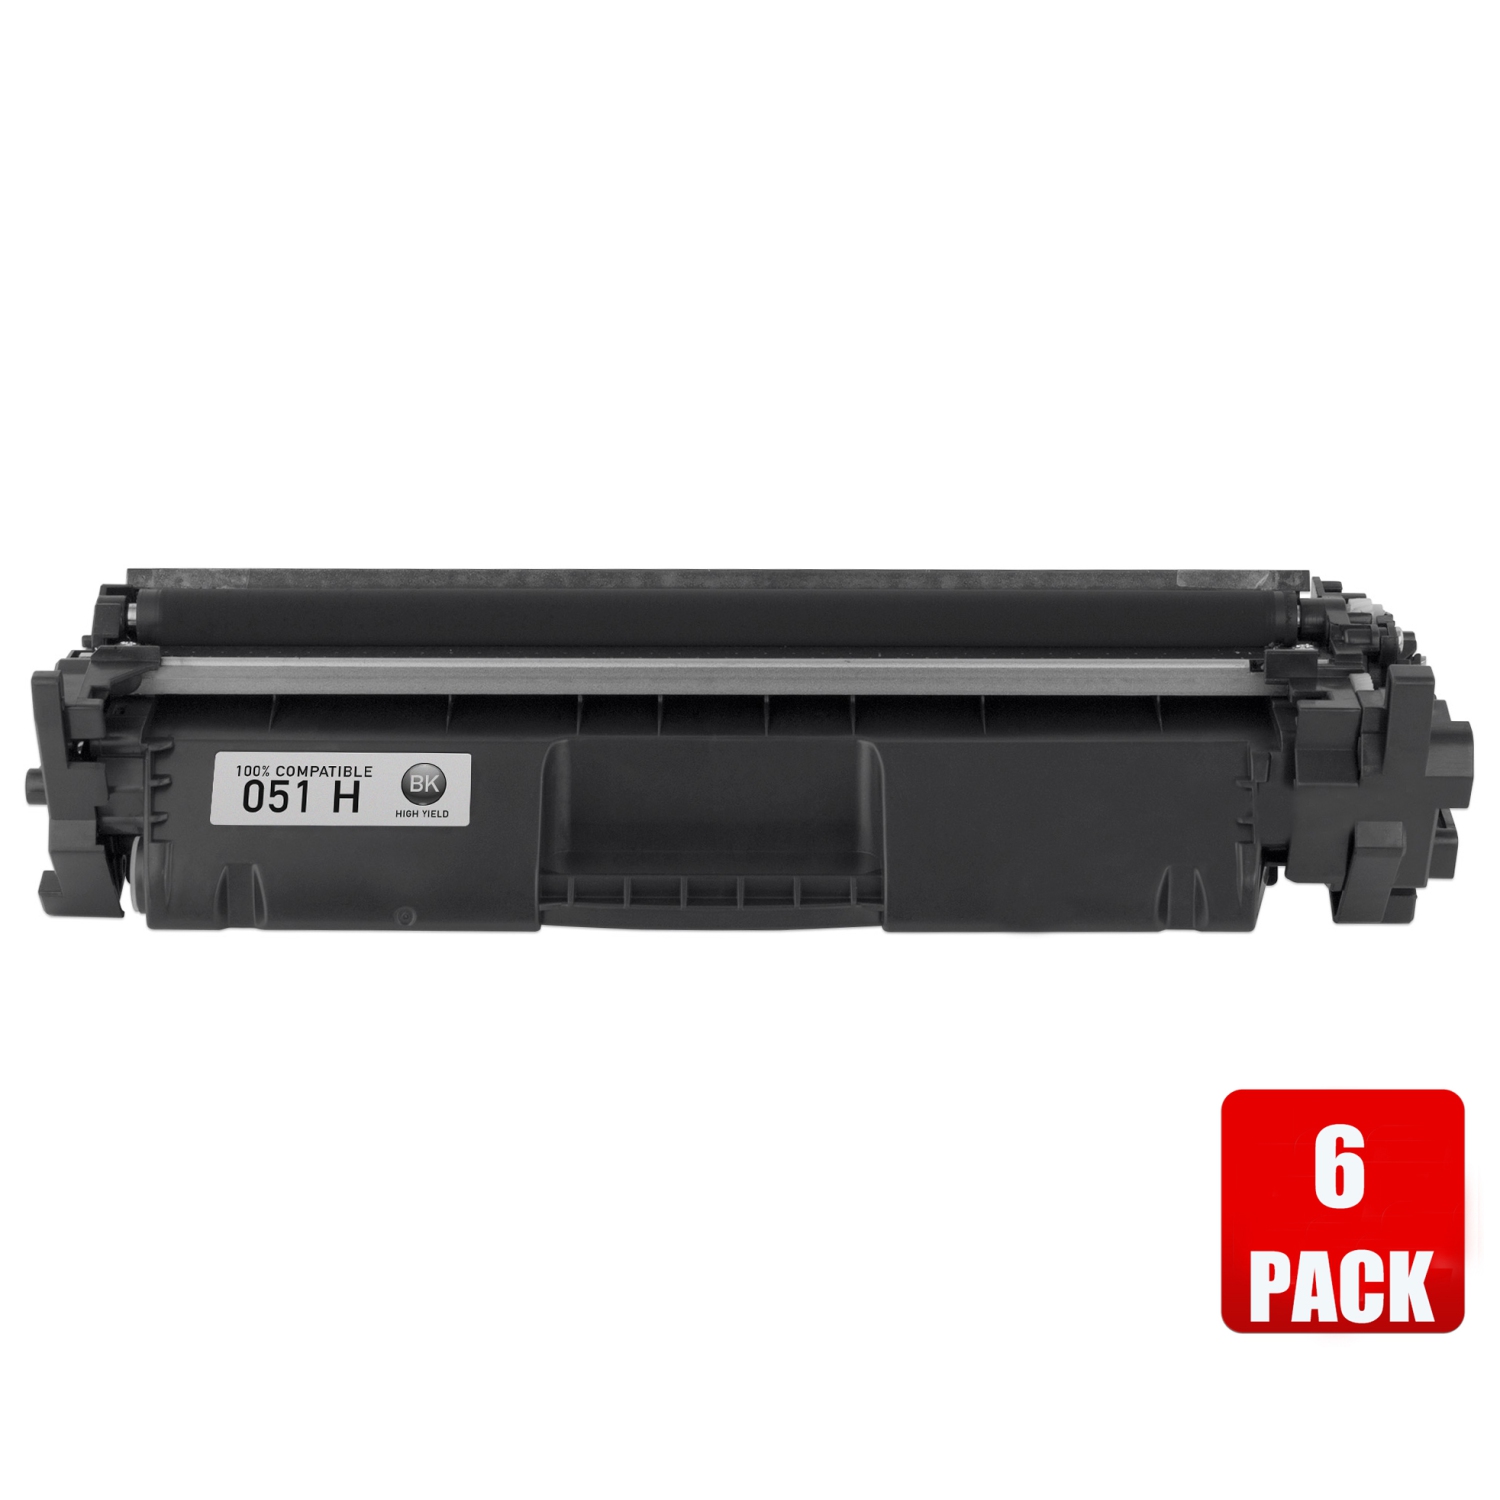 Prime 6 Pack Canon 051H/Canon-051H/051/051H High Yield Black Compatible Toner Cartridge # FREE SHIPPING